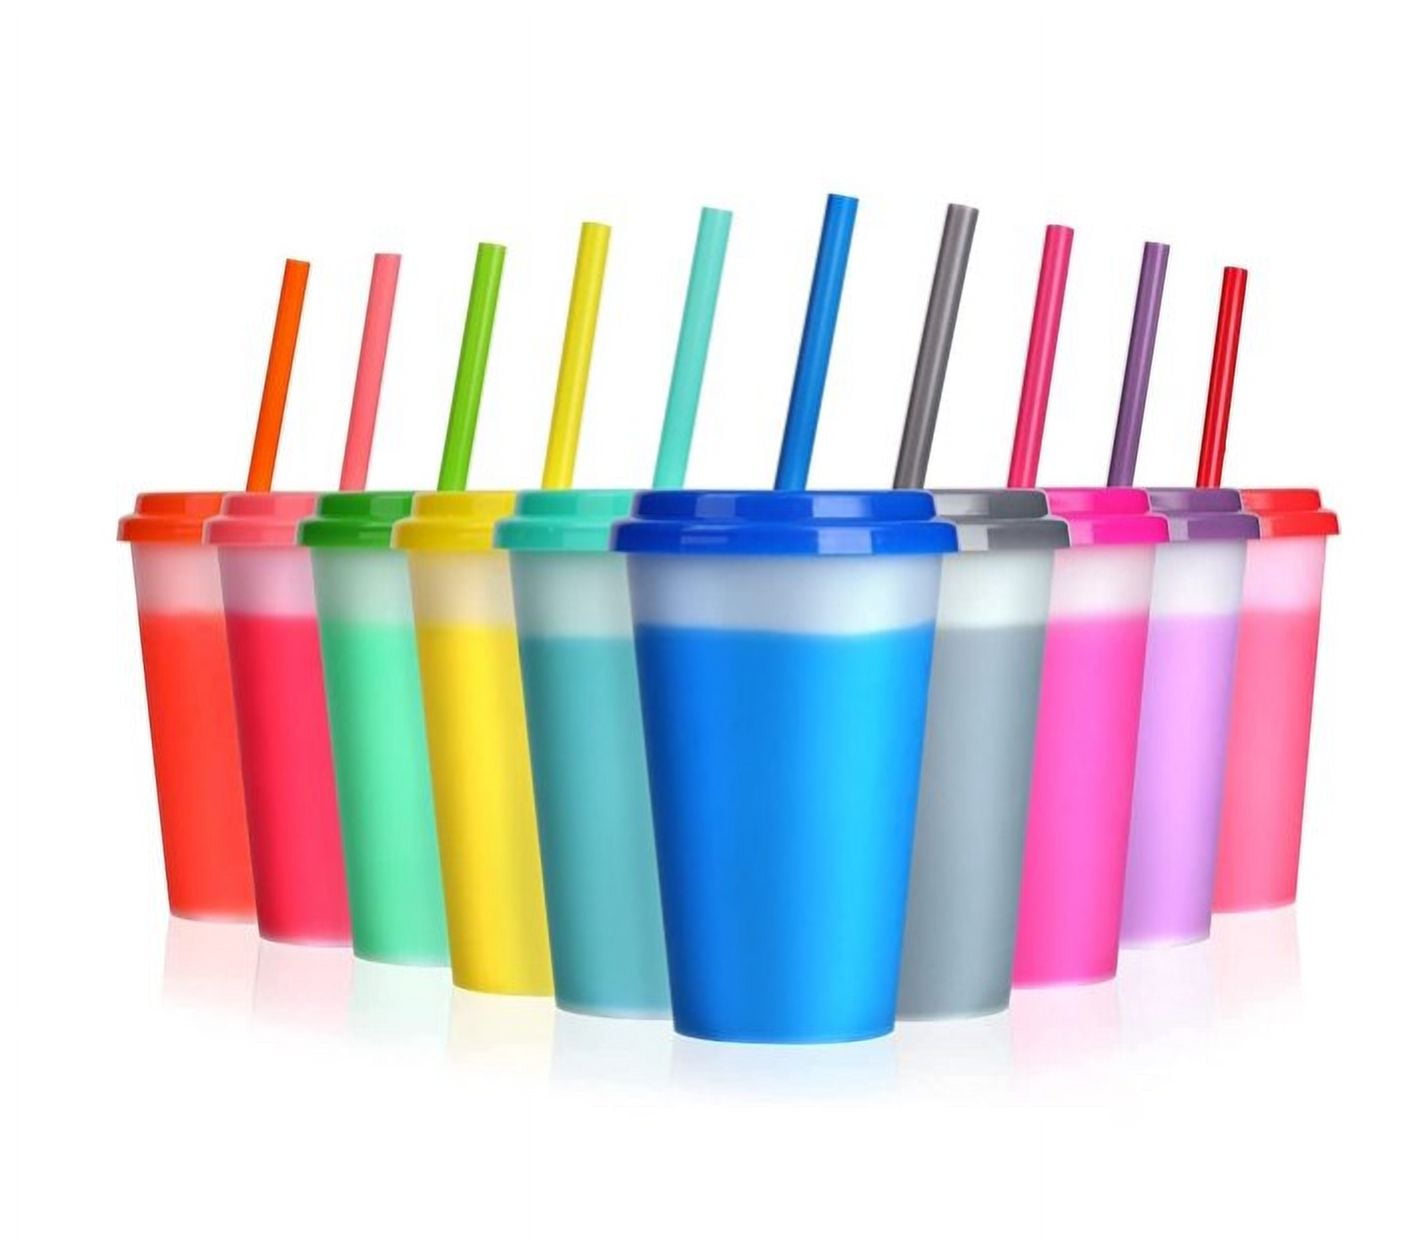 Reduce GoGo's, 3 Pack Tumbler Set – 12oz Kids Cups with Straws and